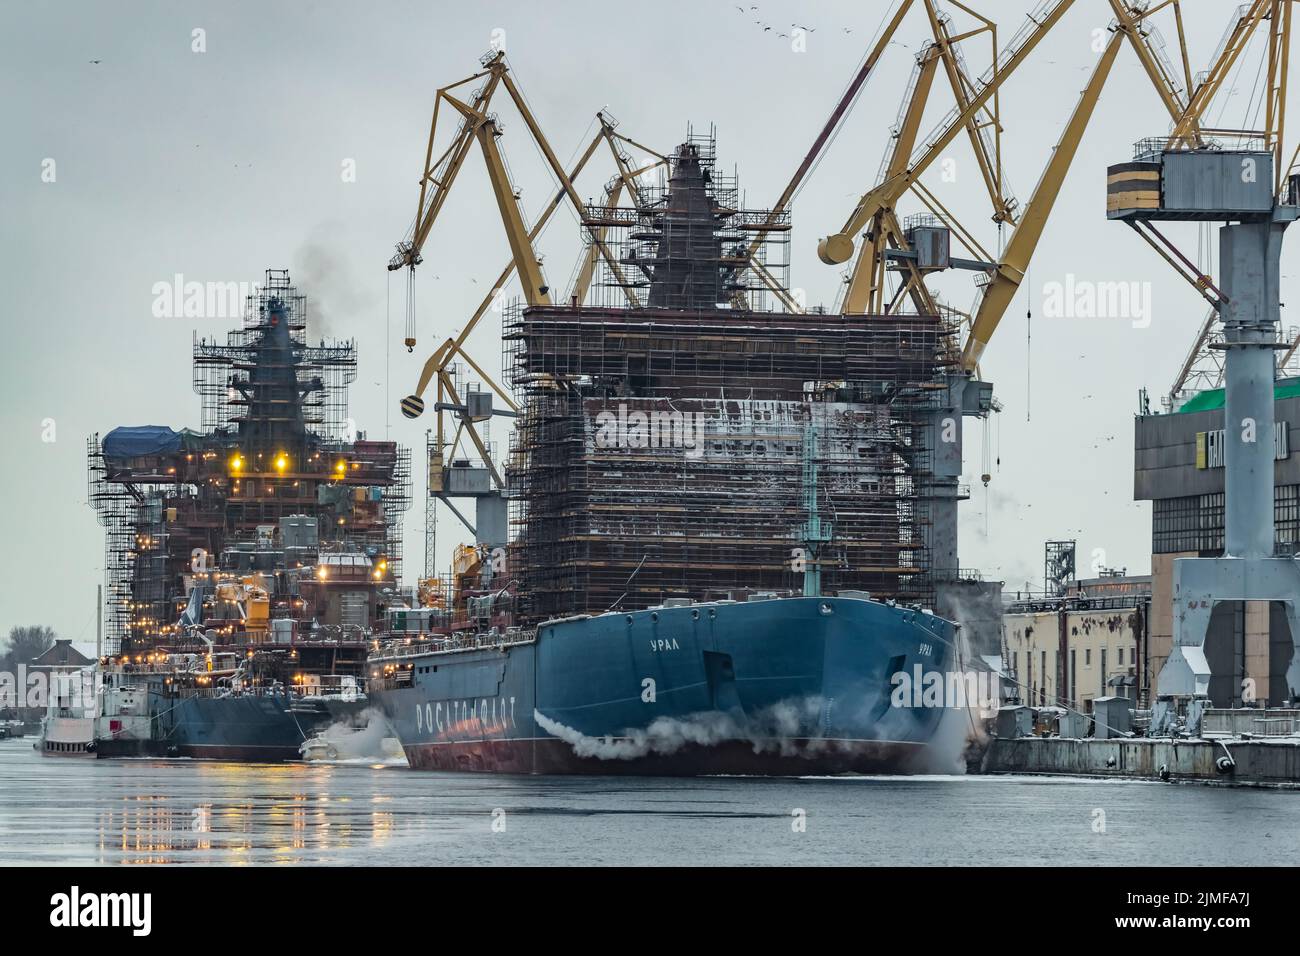 Russia, St. Petersburg, 05 February 2021: The construction of nuclear icebreakers, cranes of of the Baltic shipyard in a frosty Stock Photo